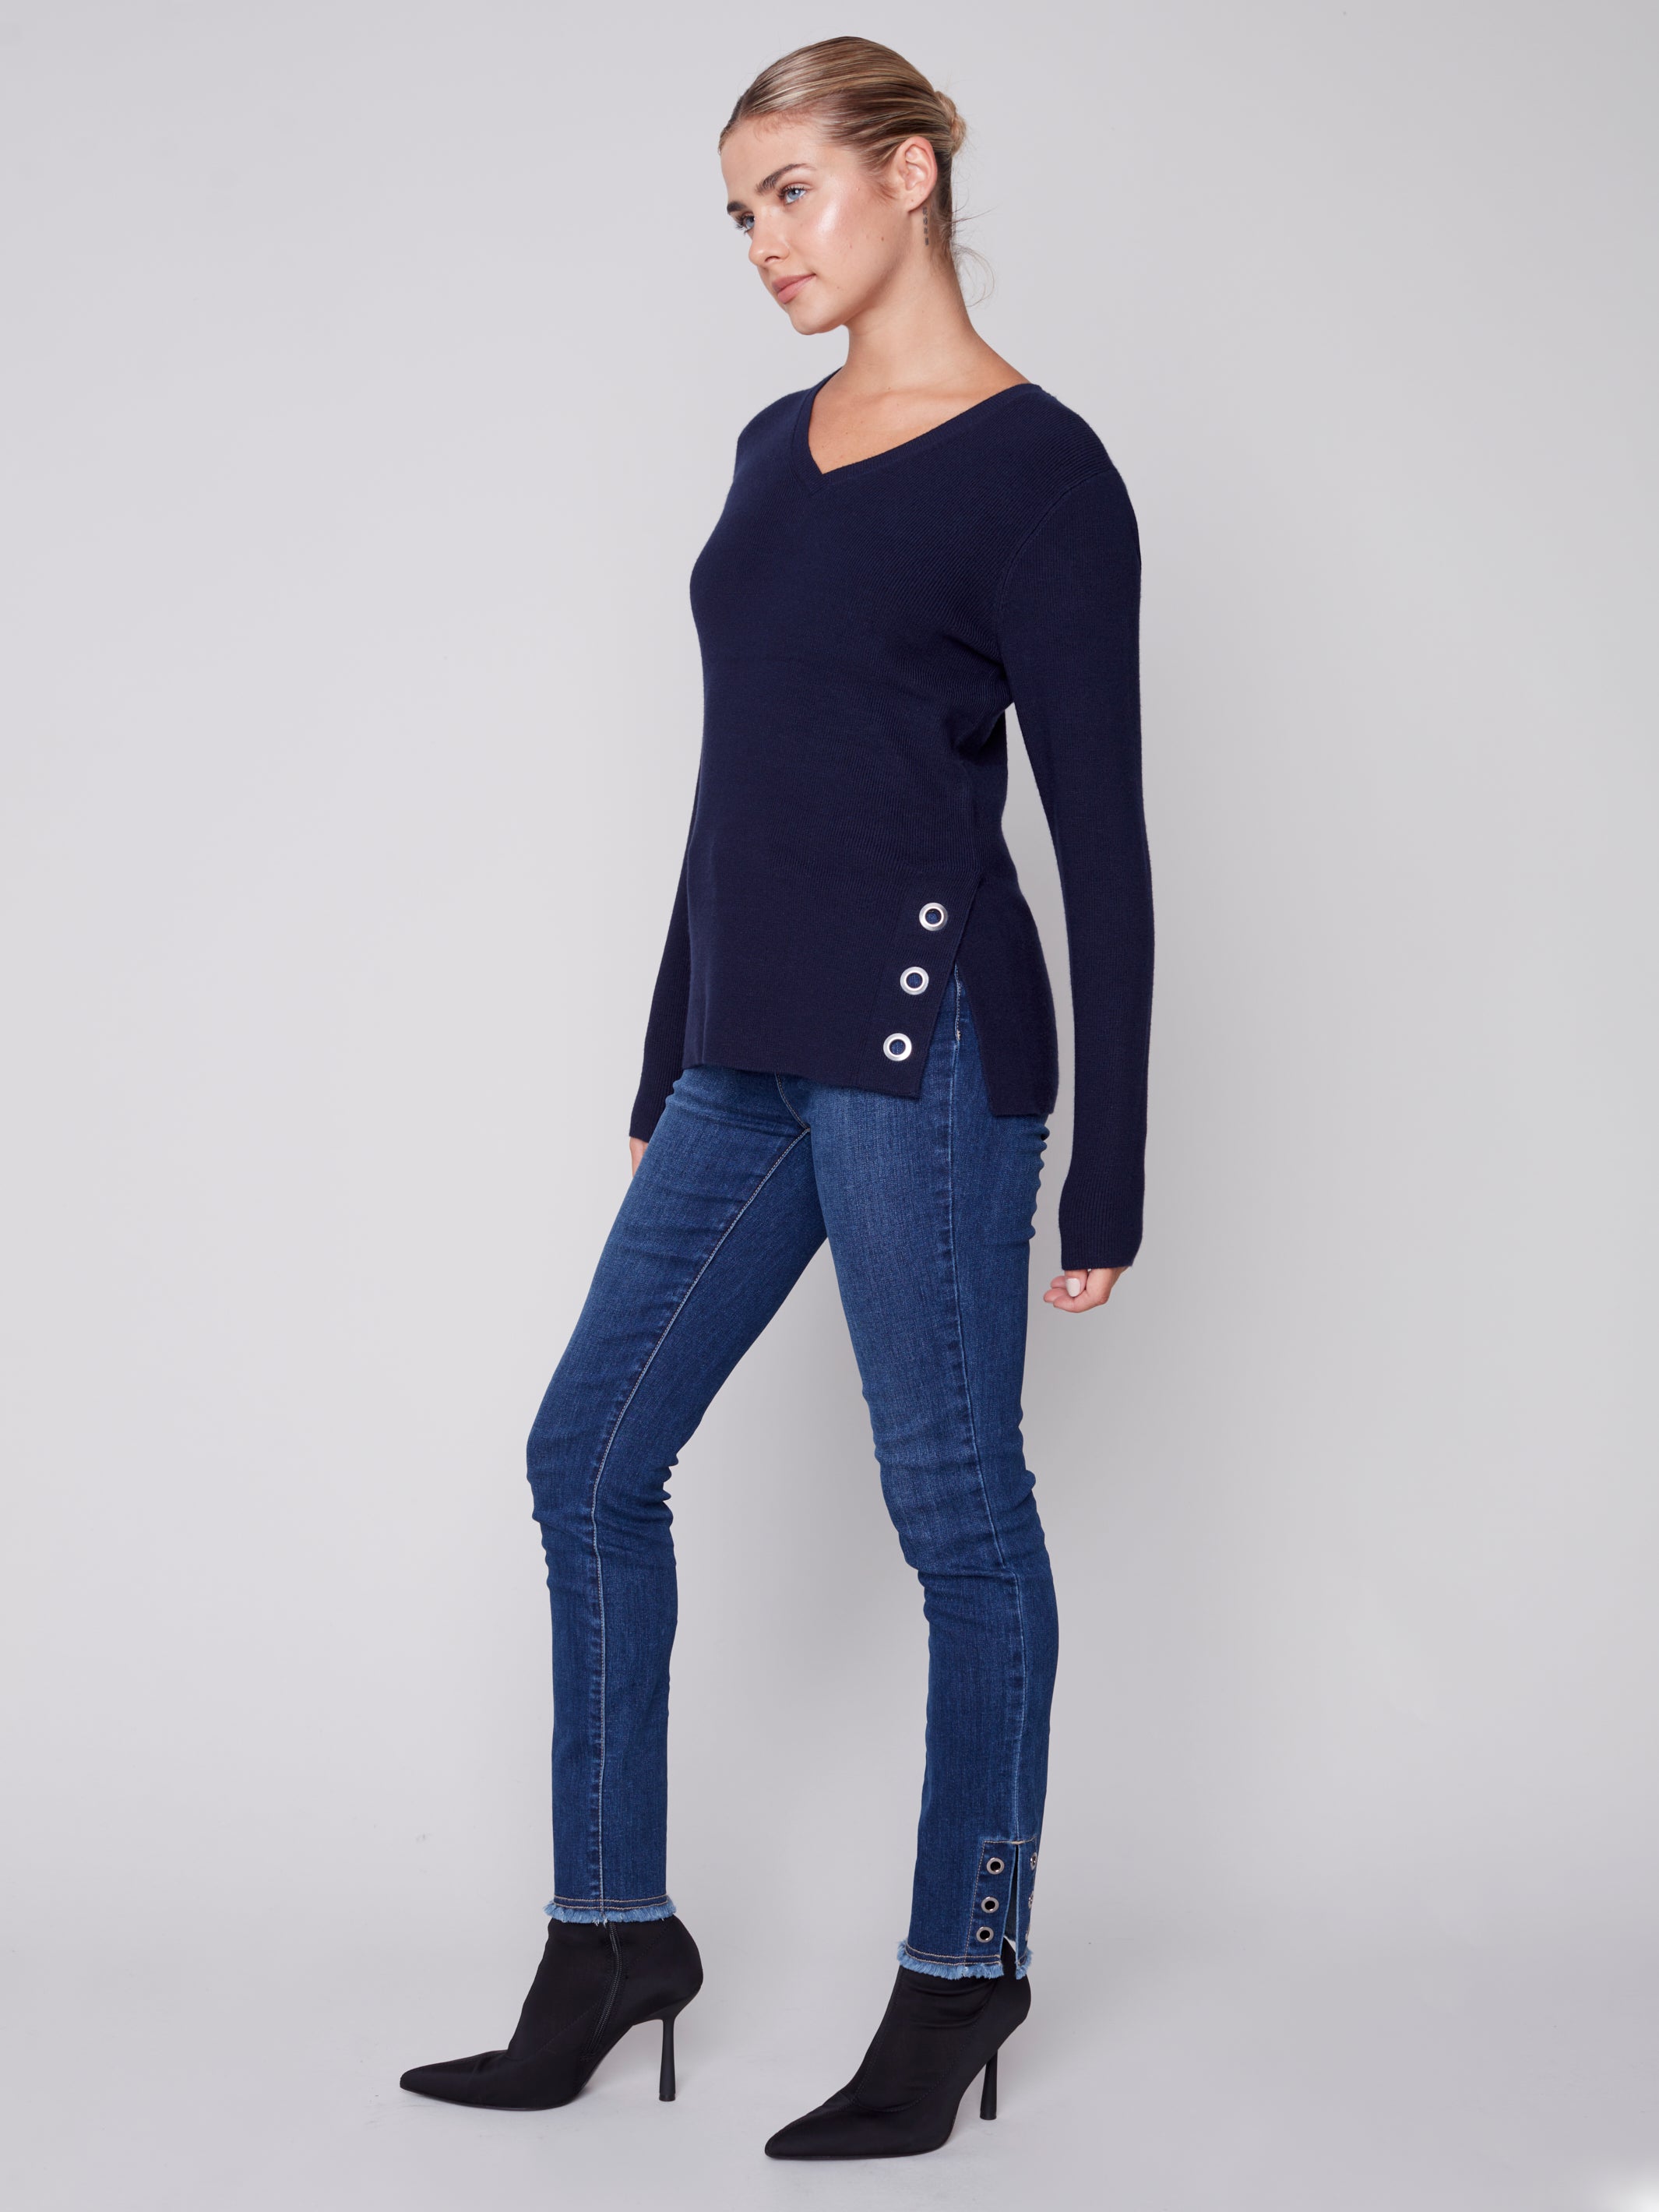 V-Neck Sweater with Grommet Details by Charlie B